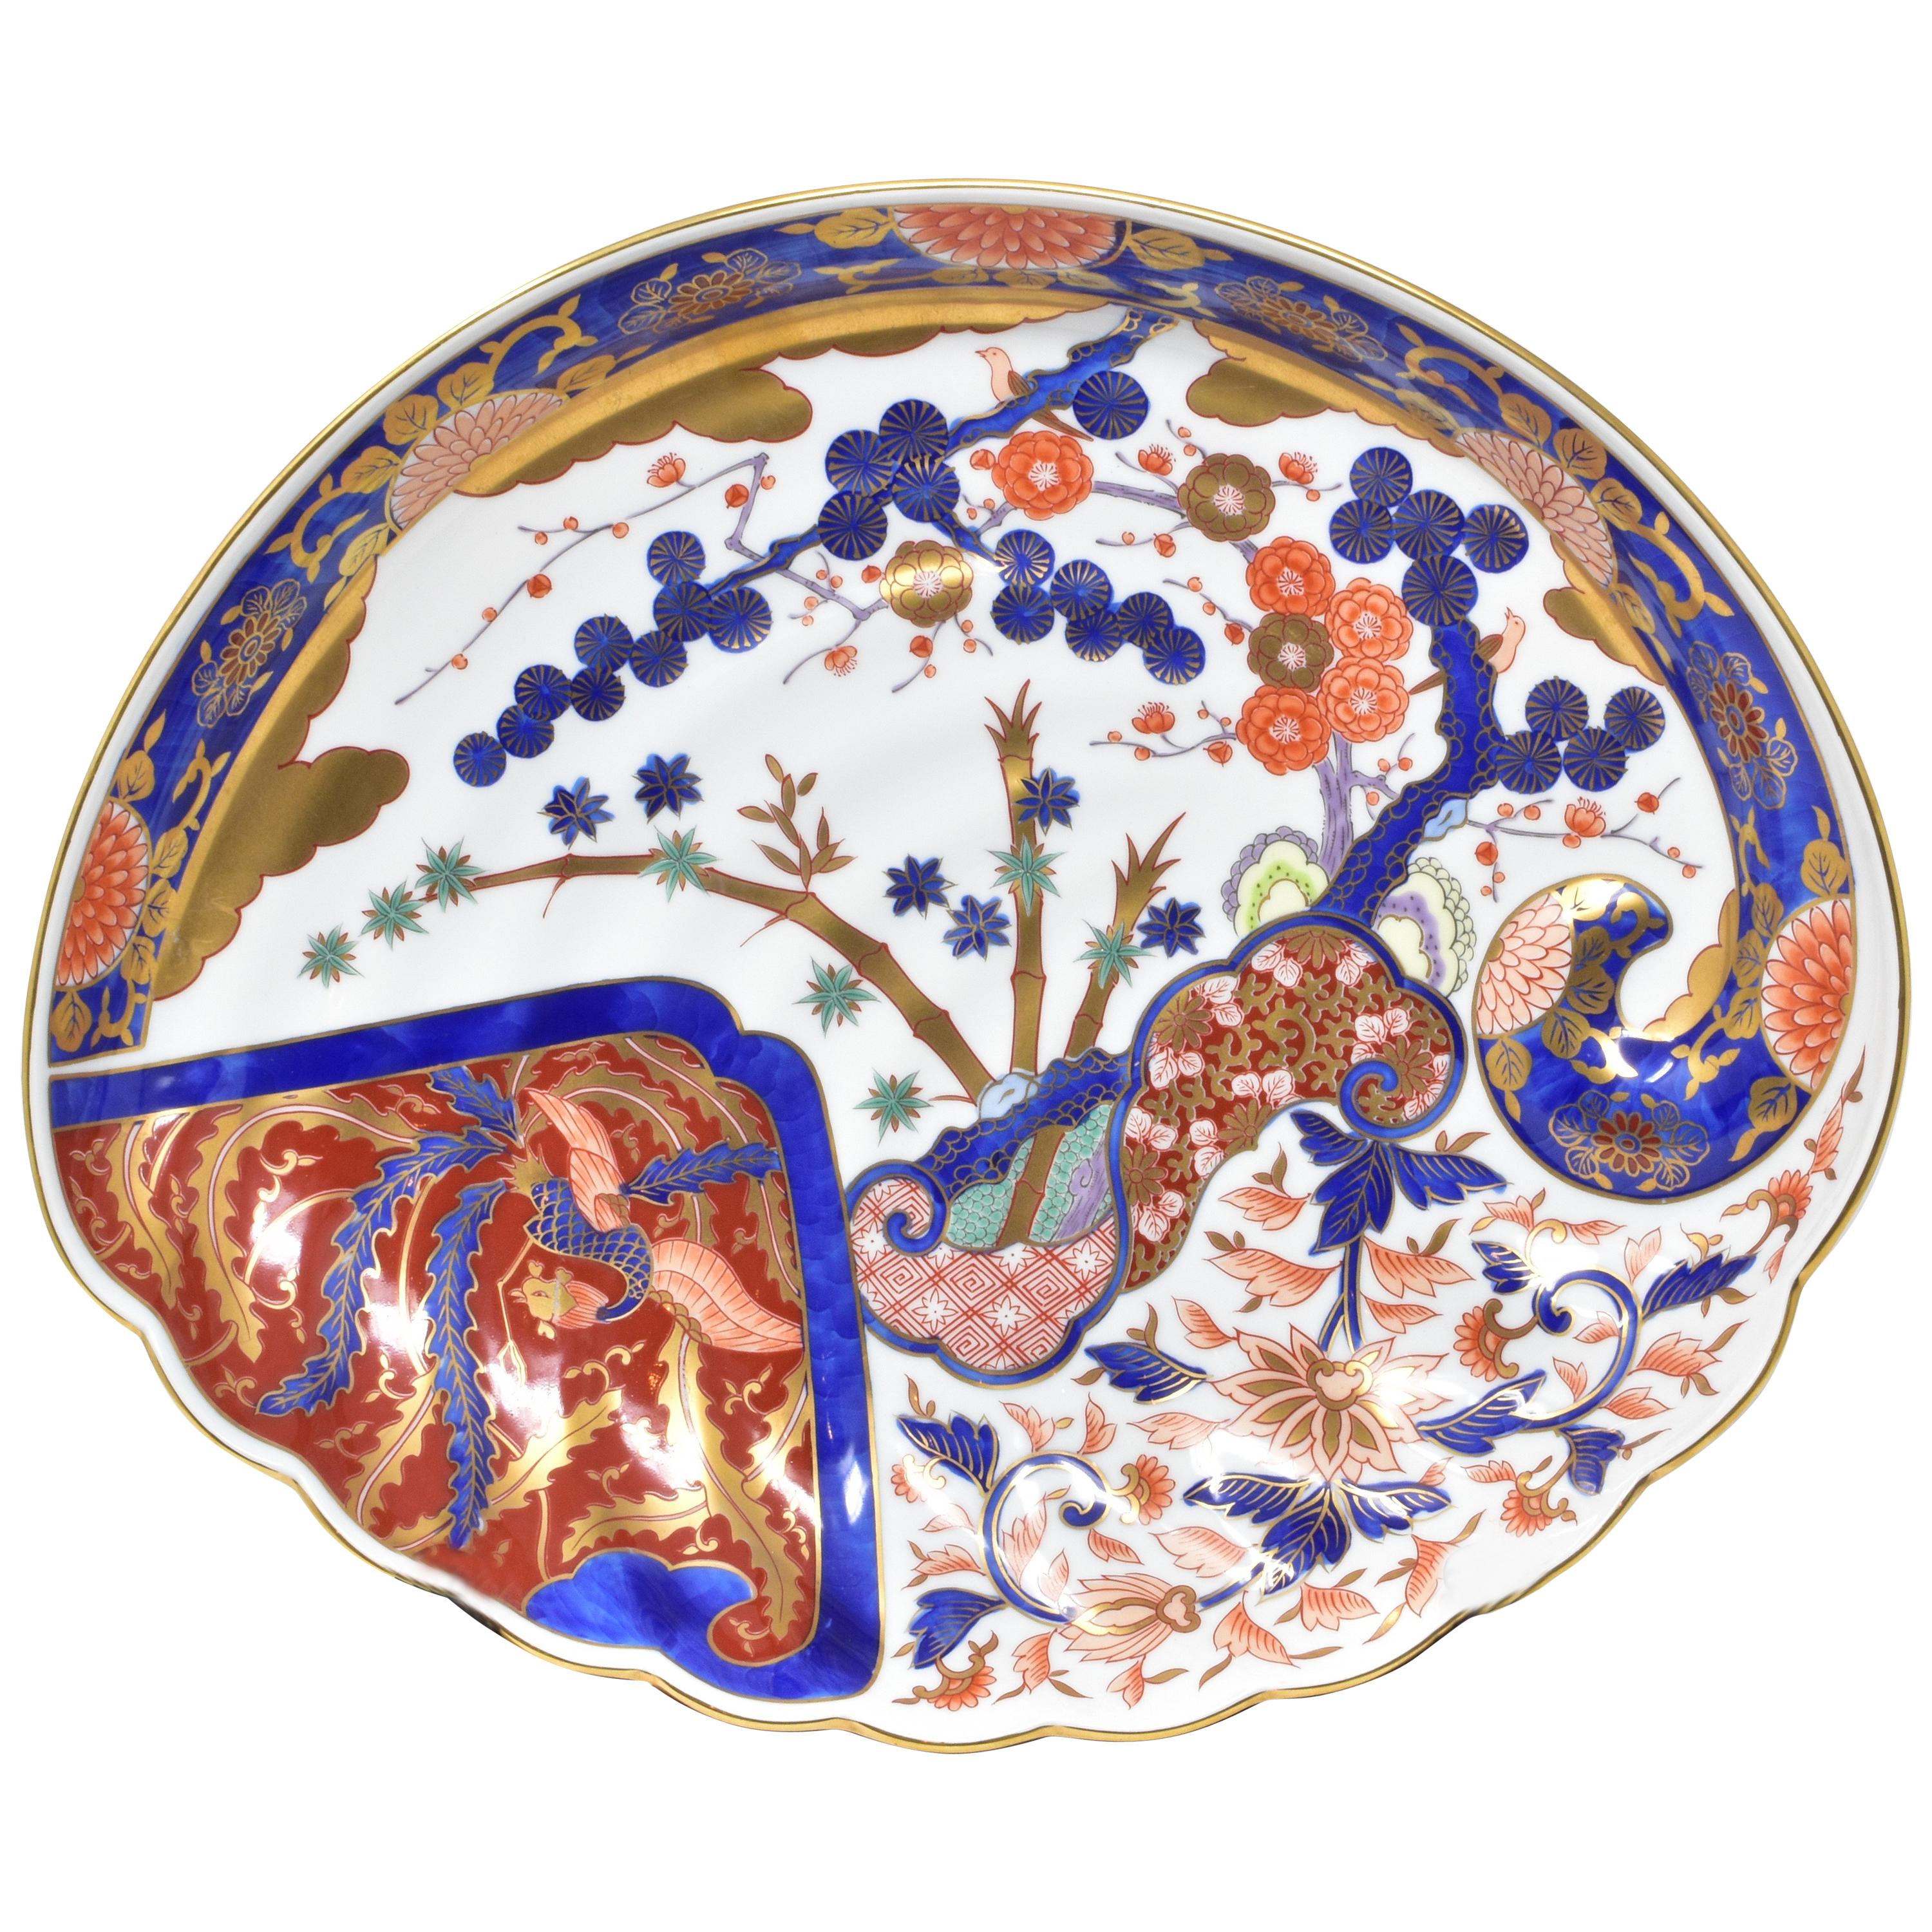 Unique contemporary Japanese Ko-Imari (old Imari) style charger stunningly gilded and hand painted on an exquisite clam shape porcelain, crafted and signed by renowned Kiln of the Imari-Arita region of southern Japan, and is inspired by shapes and